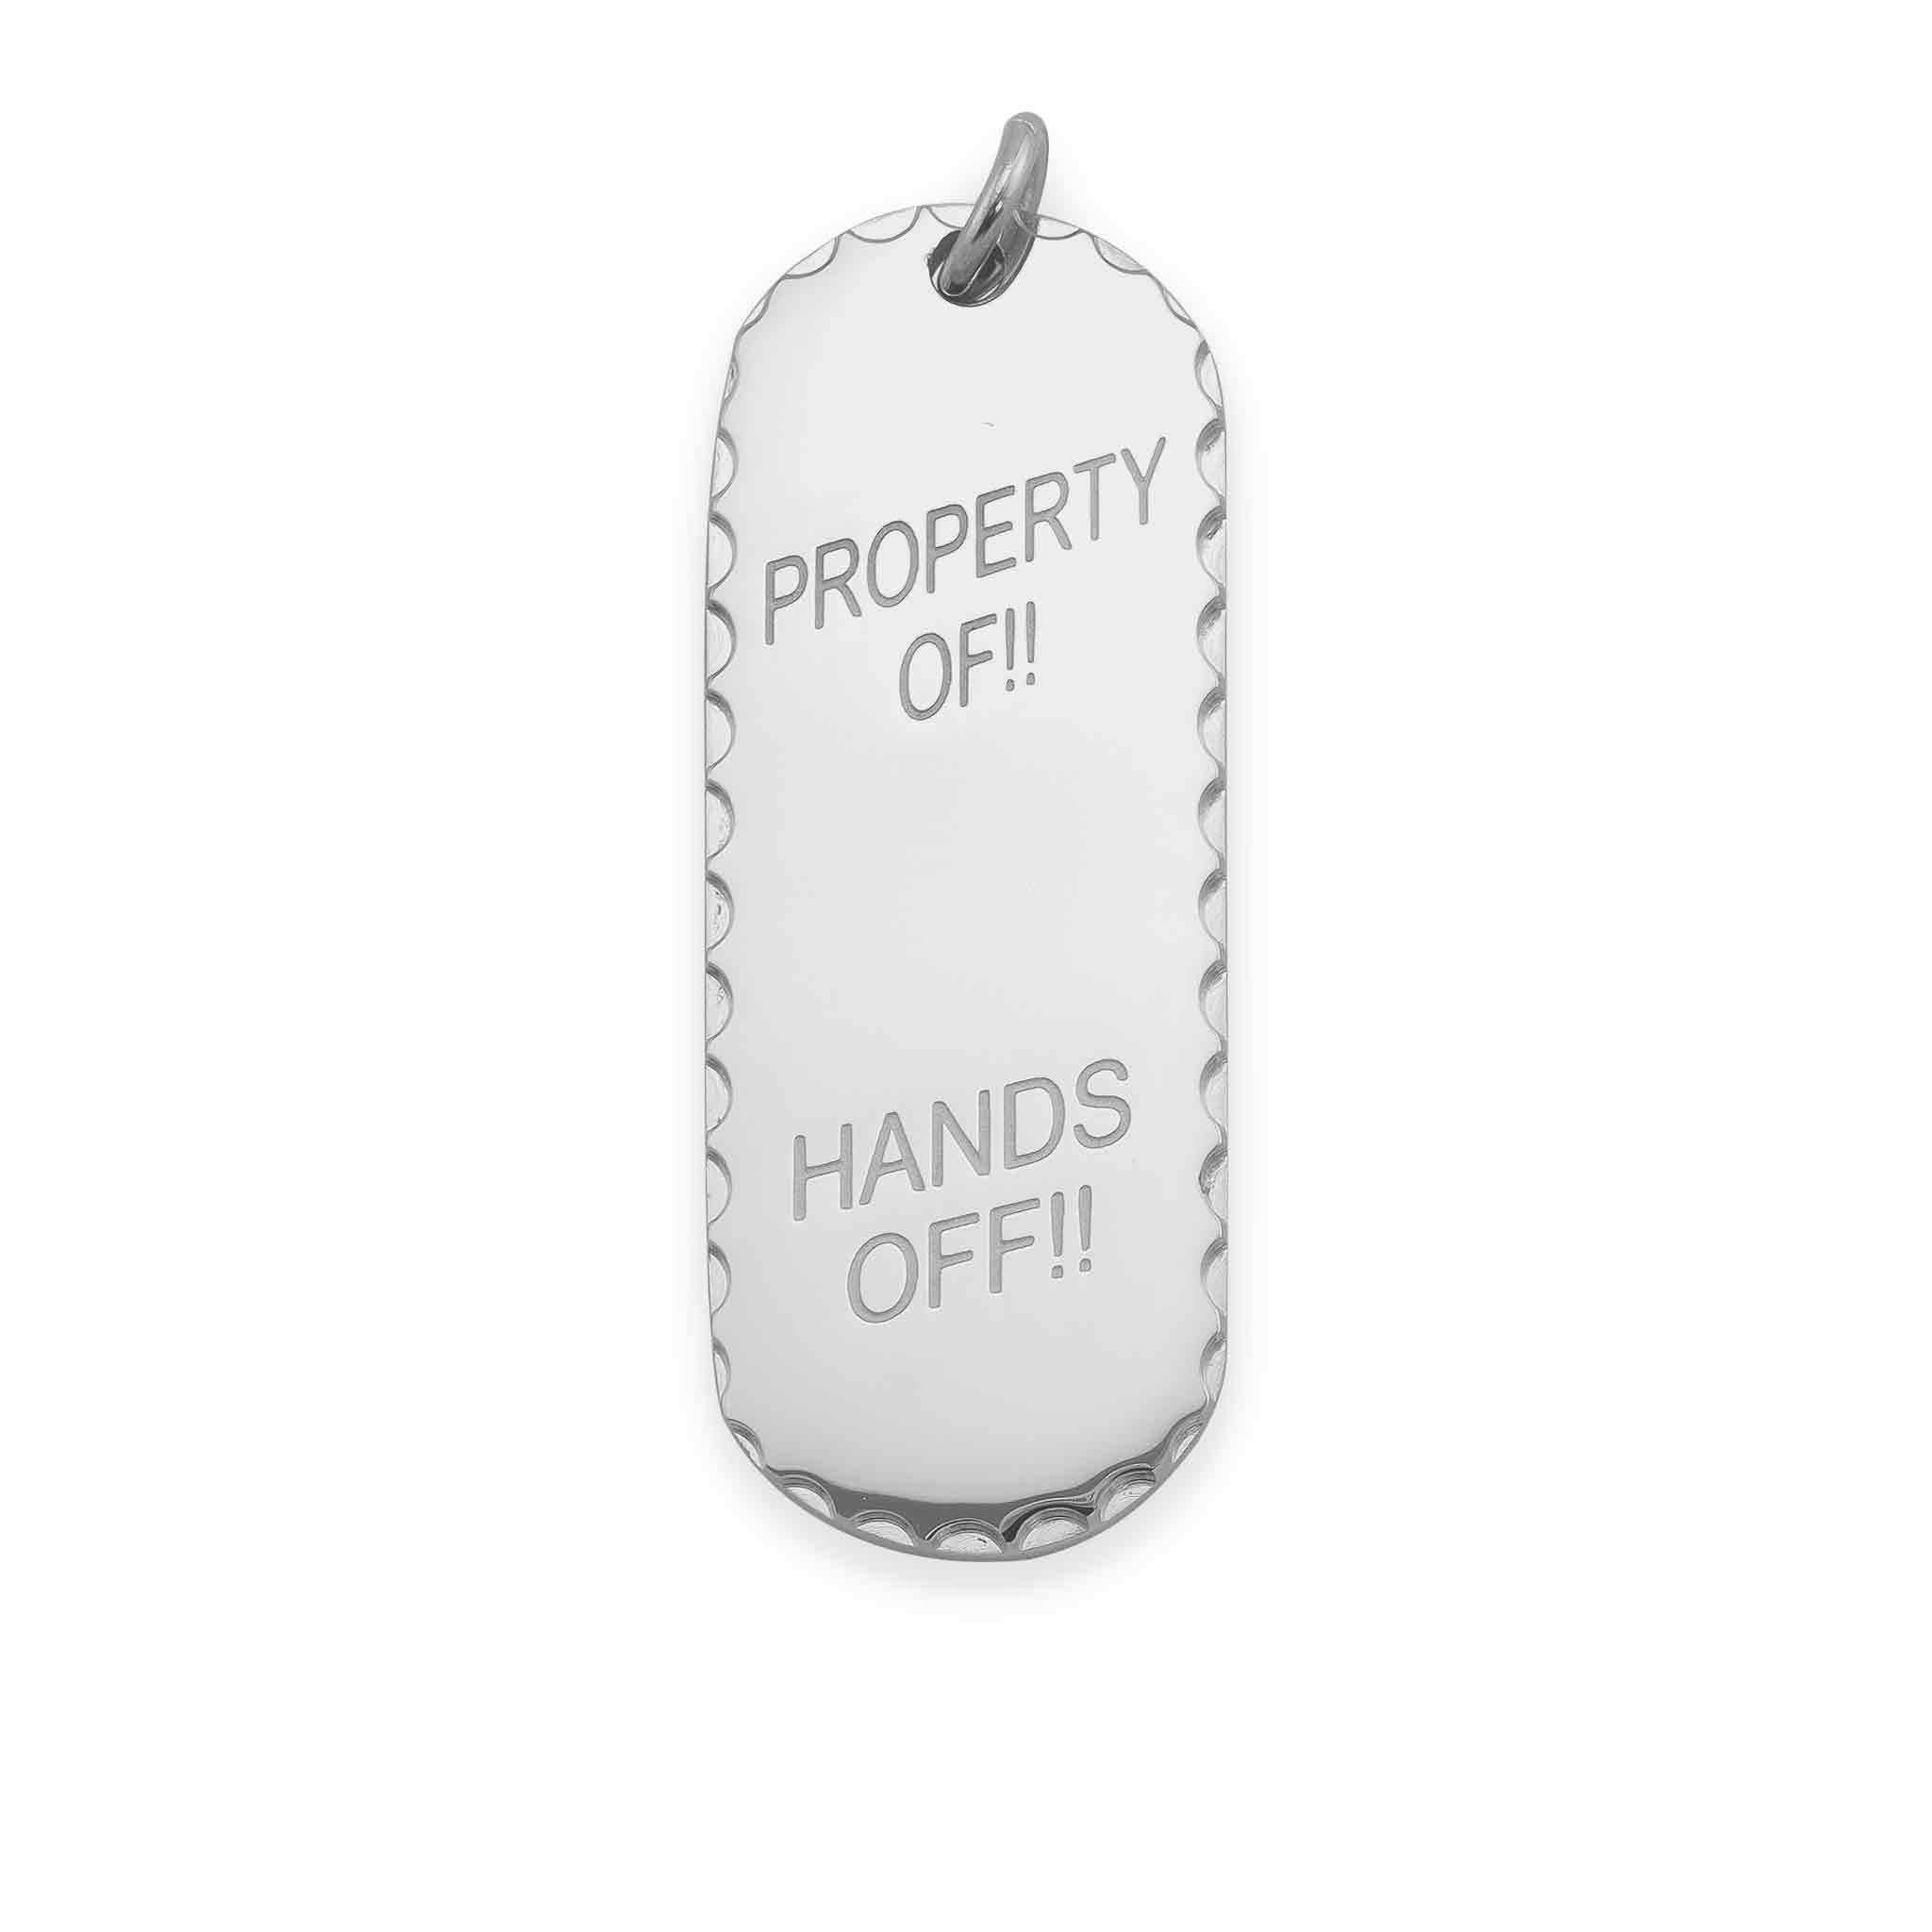 Detailed Stainless Steel "Property Of" "Hands Off" Pendant / SBB0087